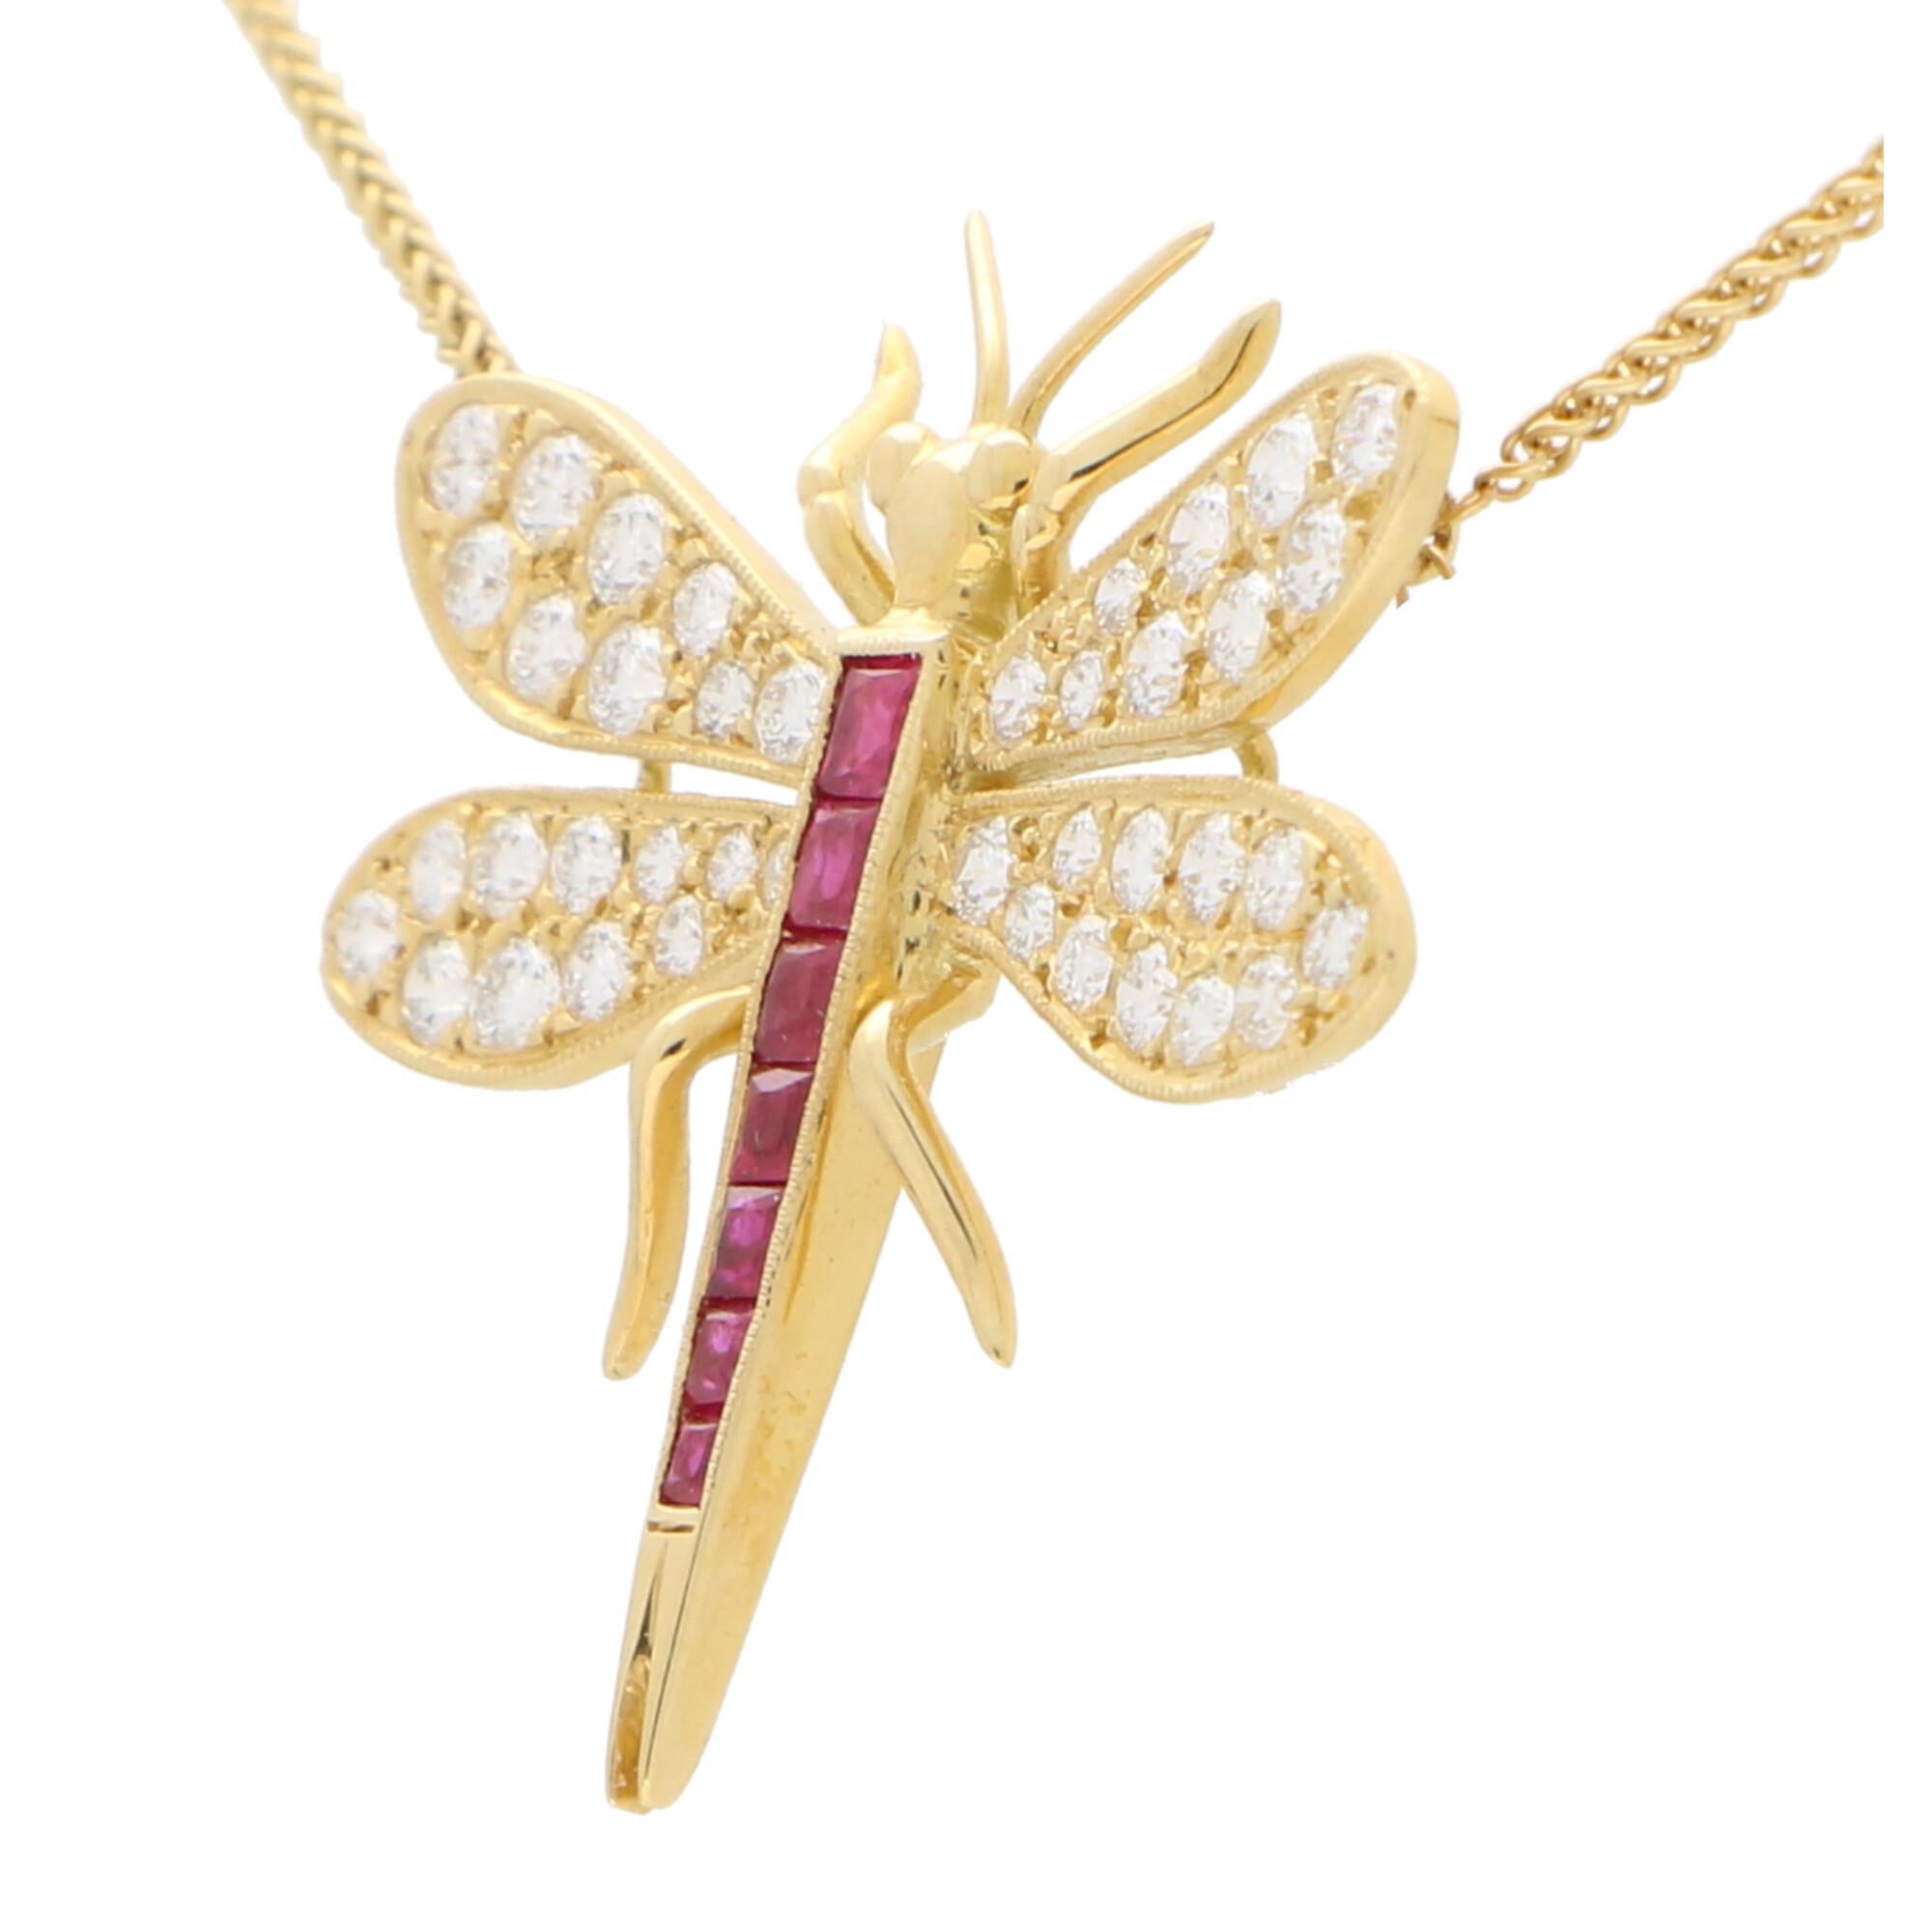 Round Cut Diamond and Ruby Dragonfly Pendant Necklace Set in 18 Karat Yellow Gold